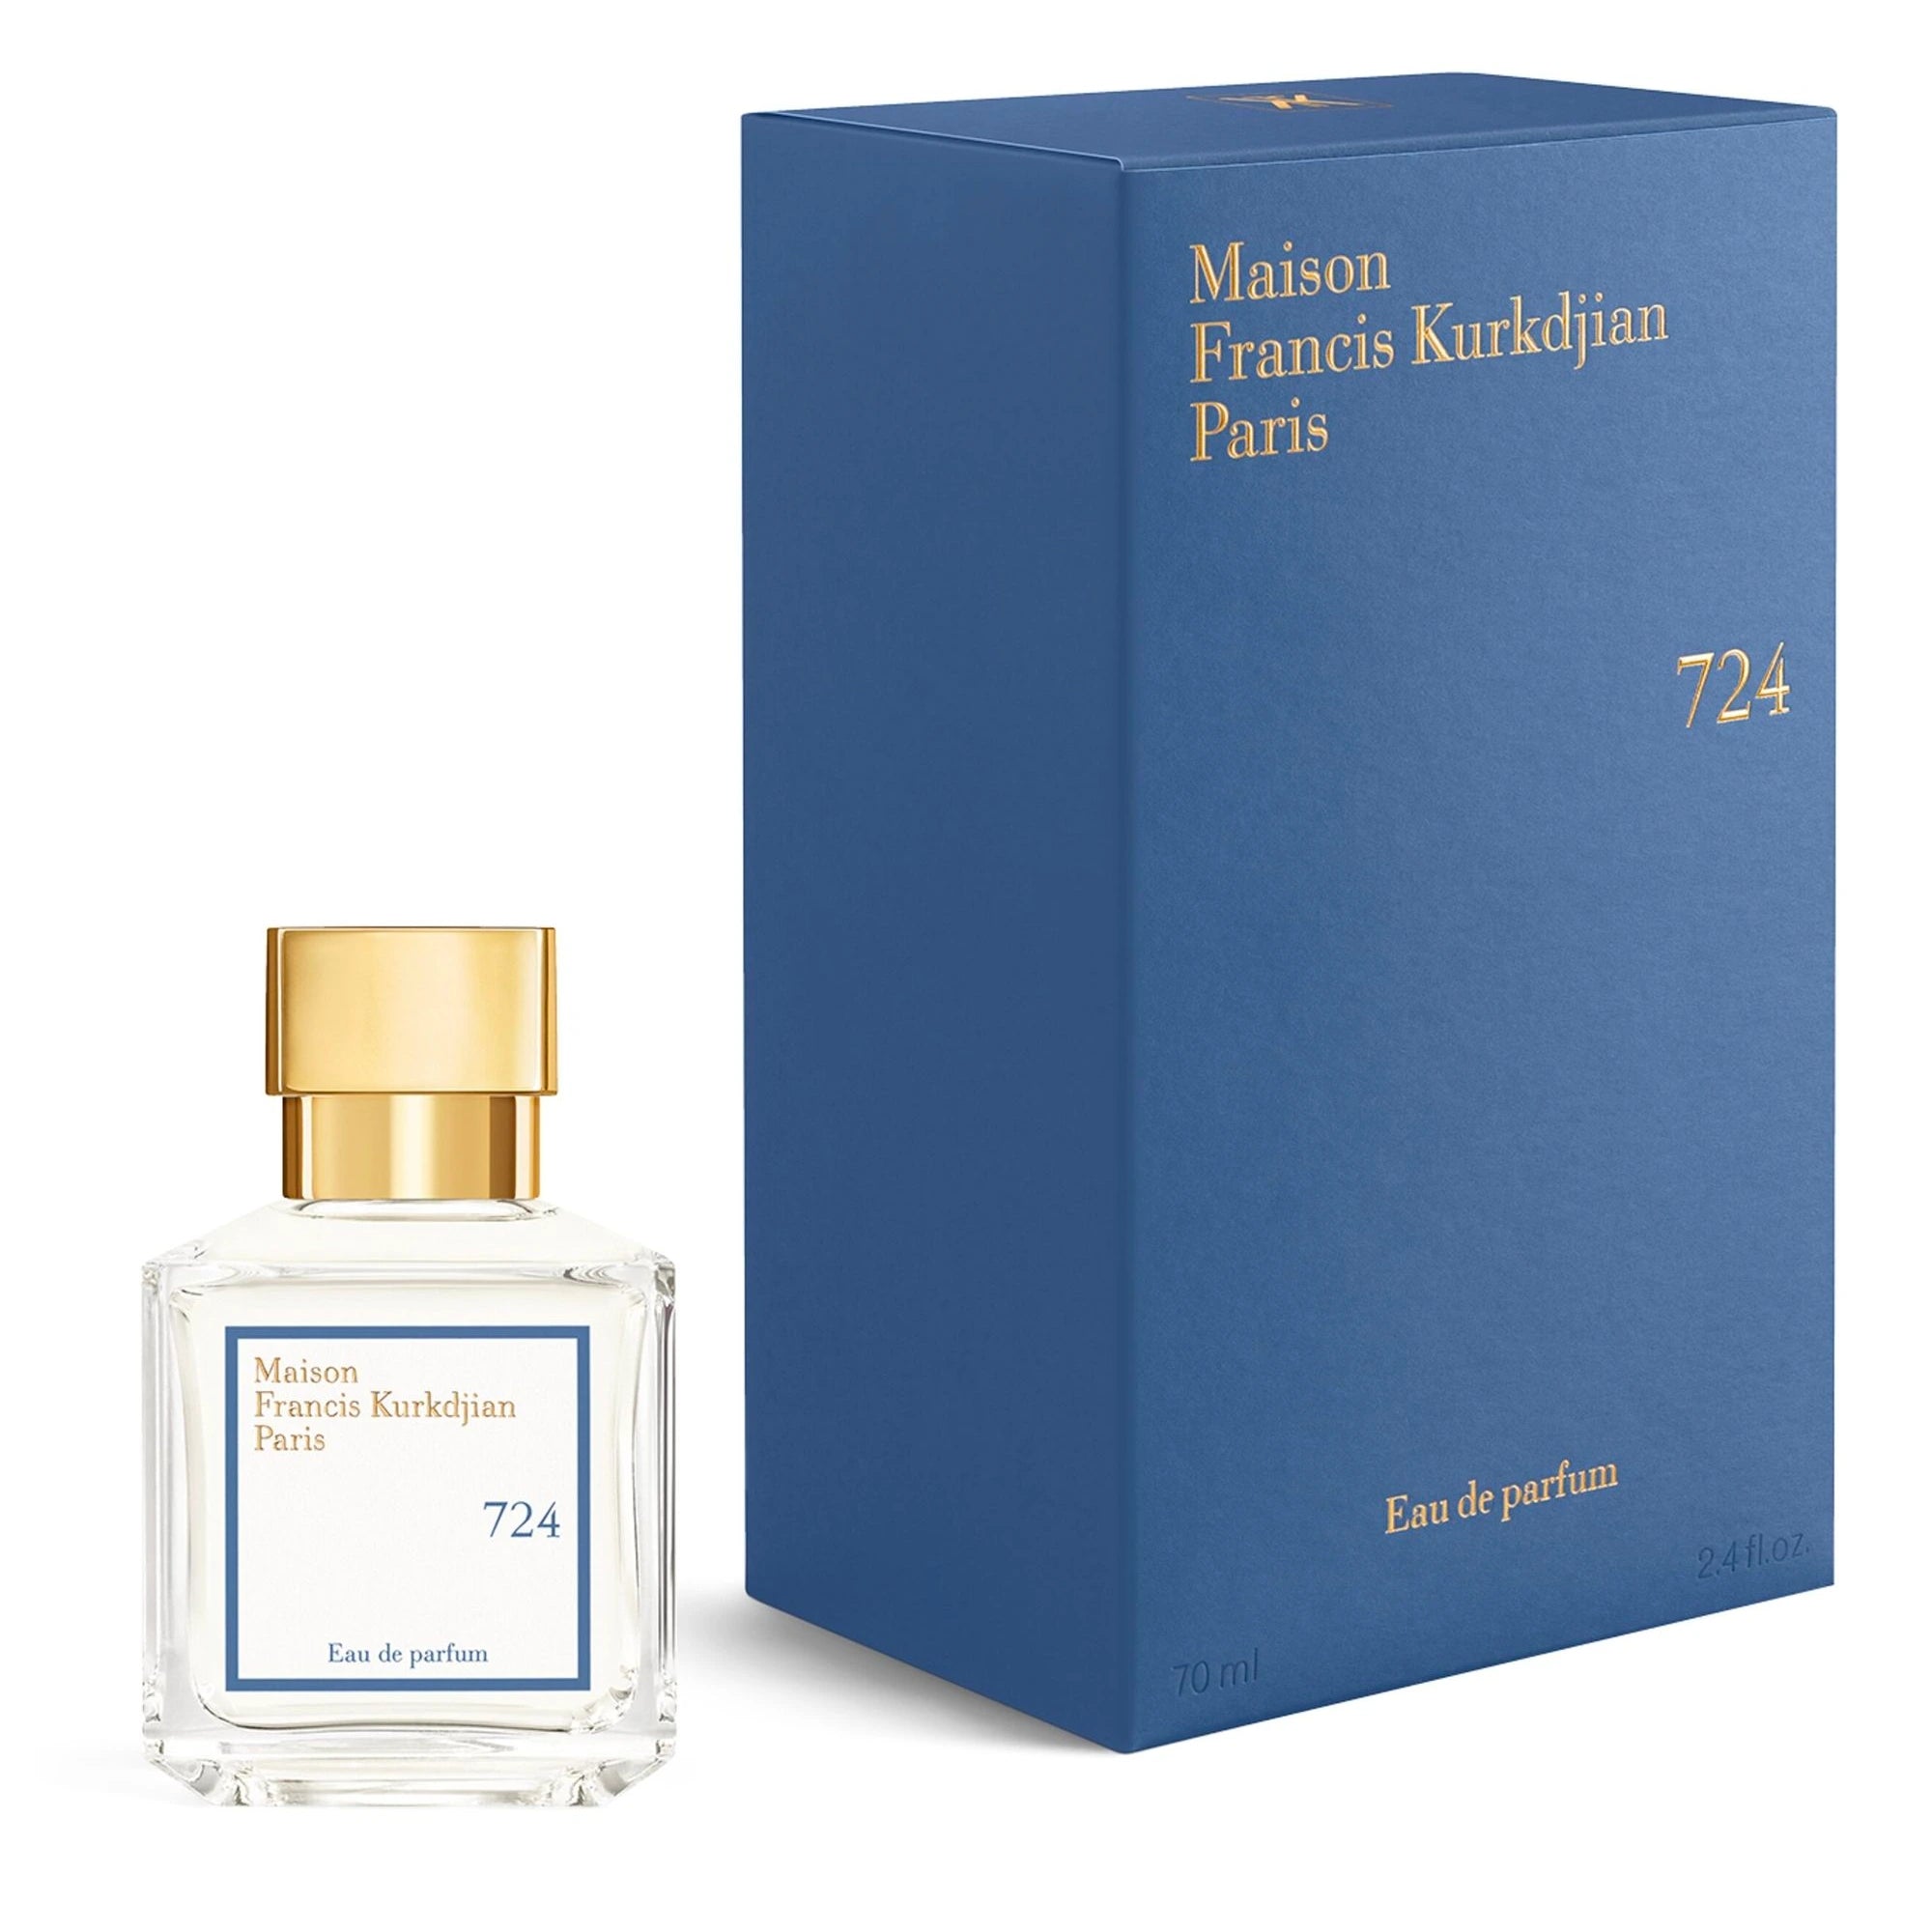 <p>Invoke the energy of the city with Maison Francis Kurkdjian 724 2.4 oz EDP unisex. A vibrant, luminous aroma of fresh Italian bergamot, effervescent aldehydes, white florals, jasmine, and sandalwood accord is sure to inspire. An unexpected fragrance with an unmistakable personality, this unisex scent will keep you energized all day. Experience the city rhythm!</p>